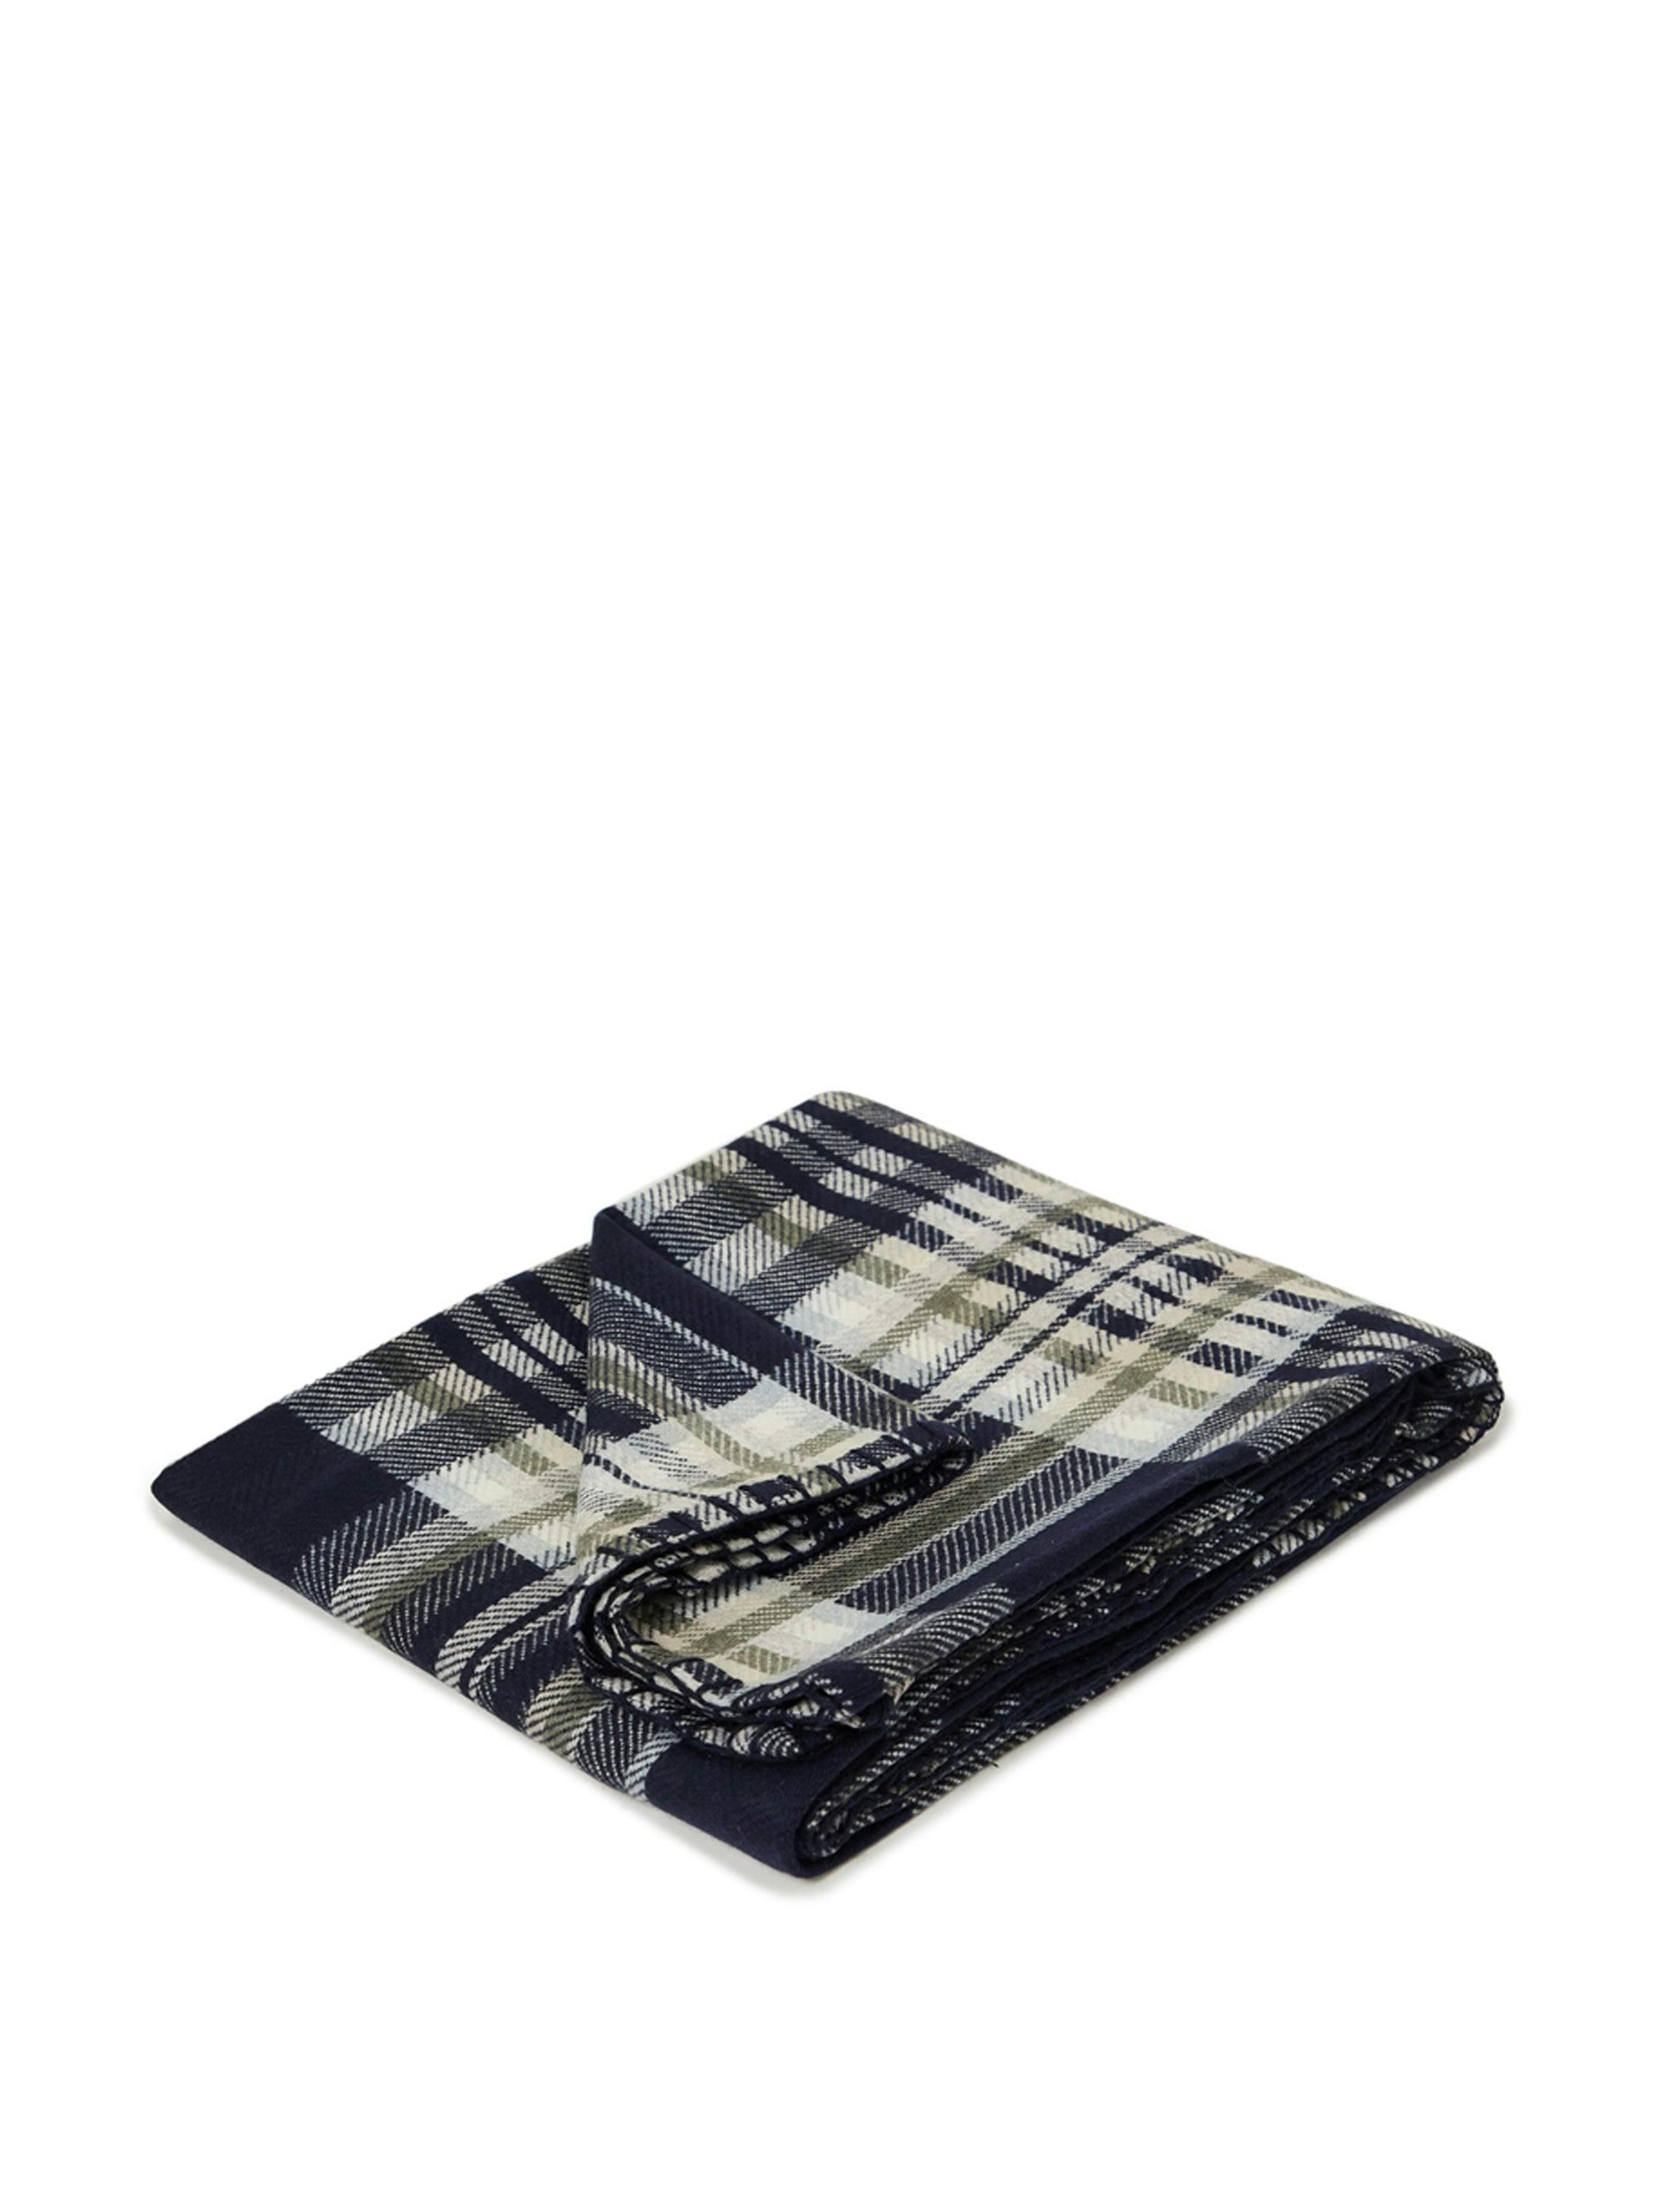 The Blanket in green and navy check